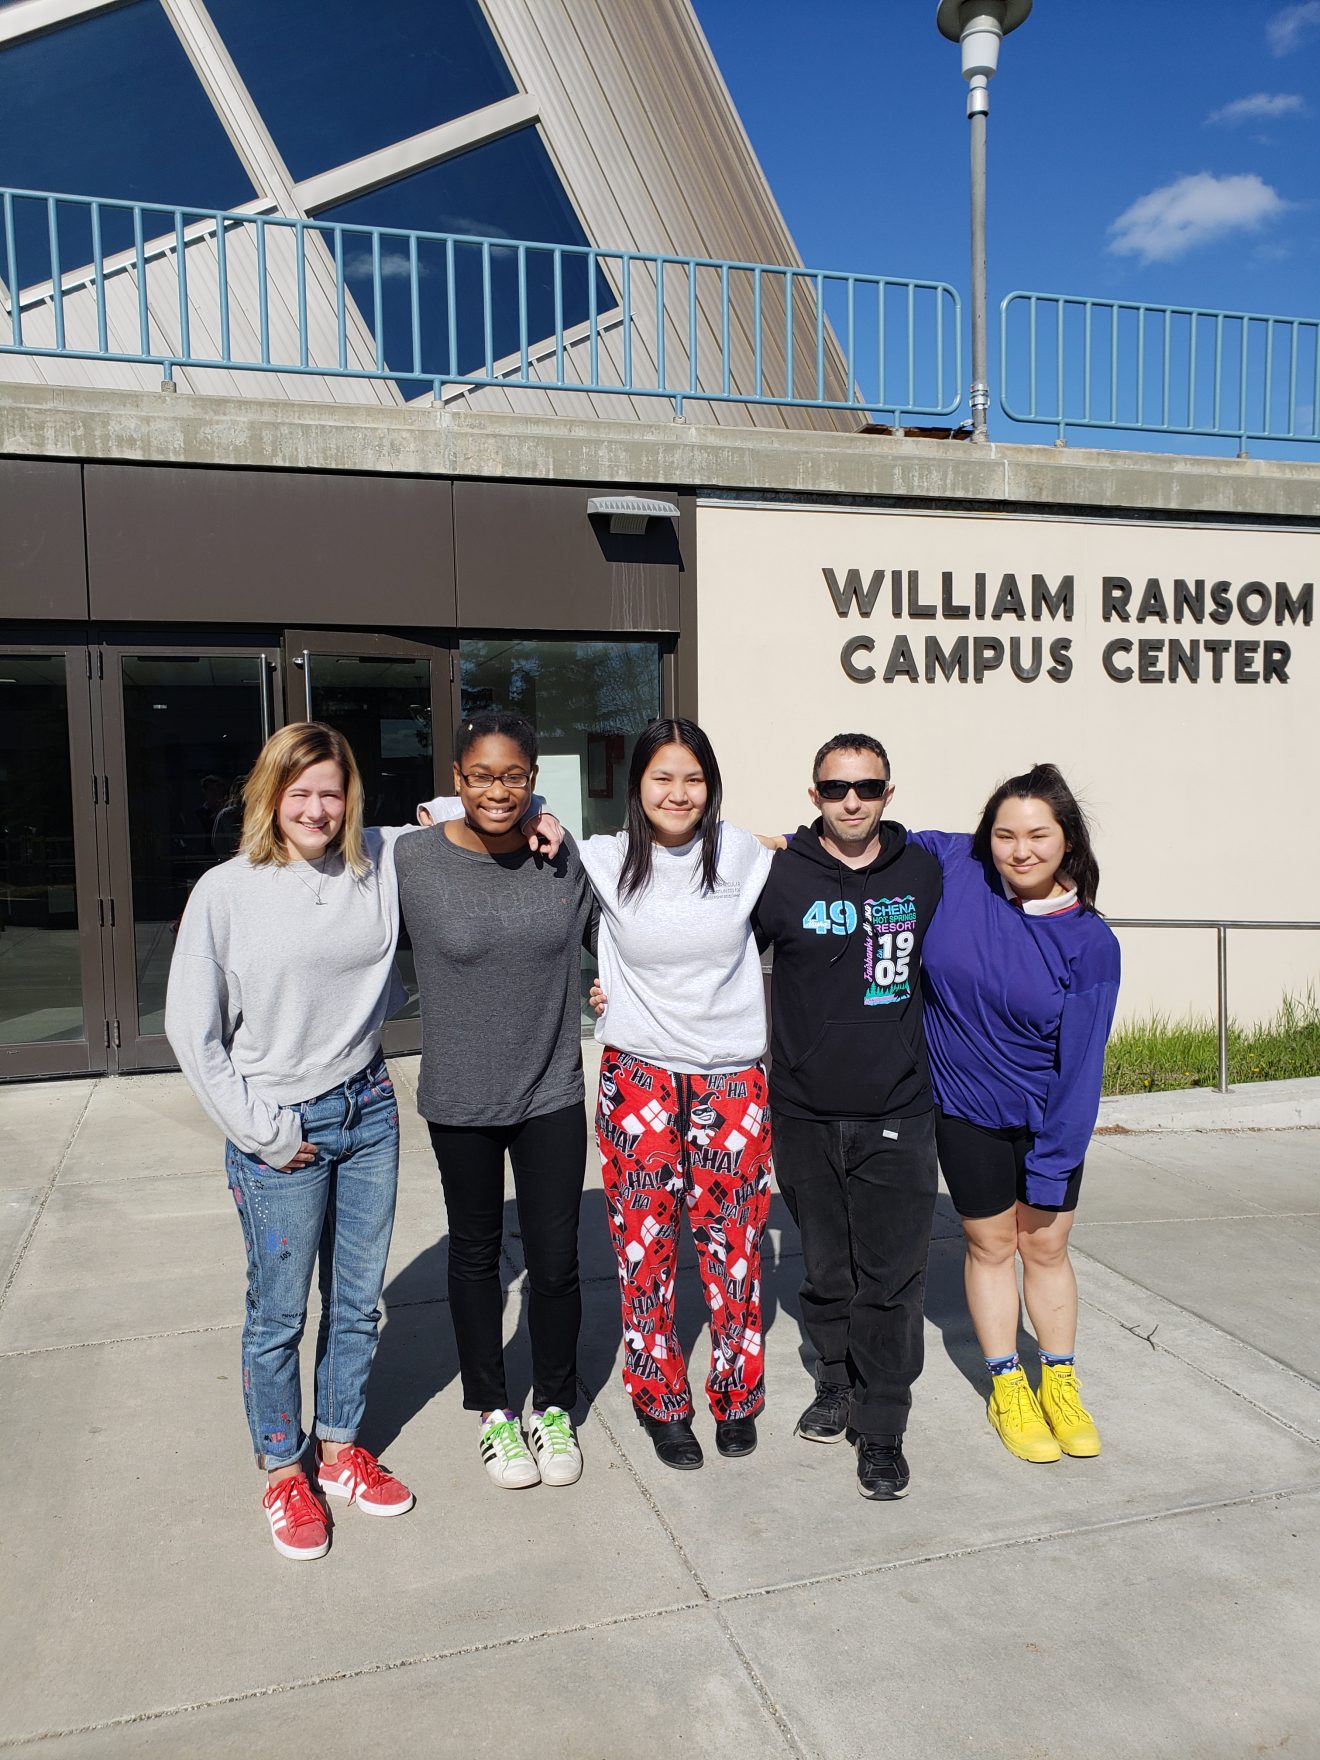 Ingrid Fiebig, Malikah Hughes, Claire Ketzler, Travis Sevier and Nastasia Caole graduated from the 2018-2019 First-Year Leadership Academy.